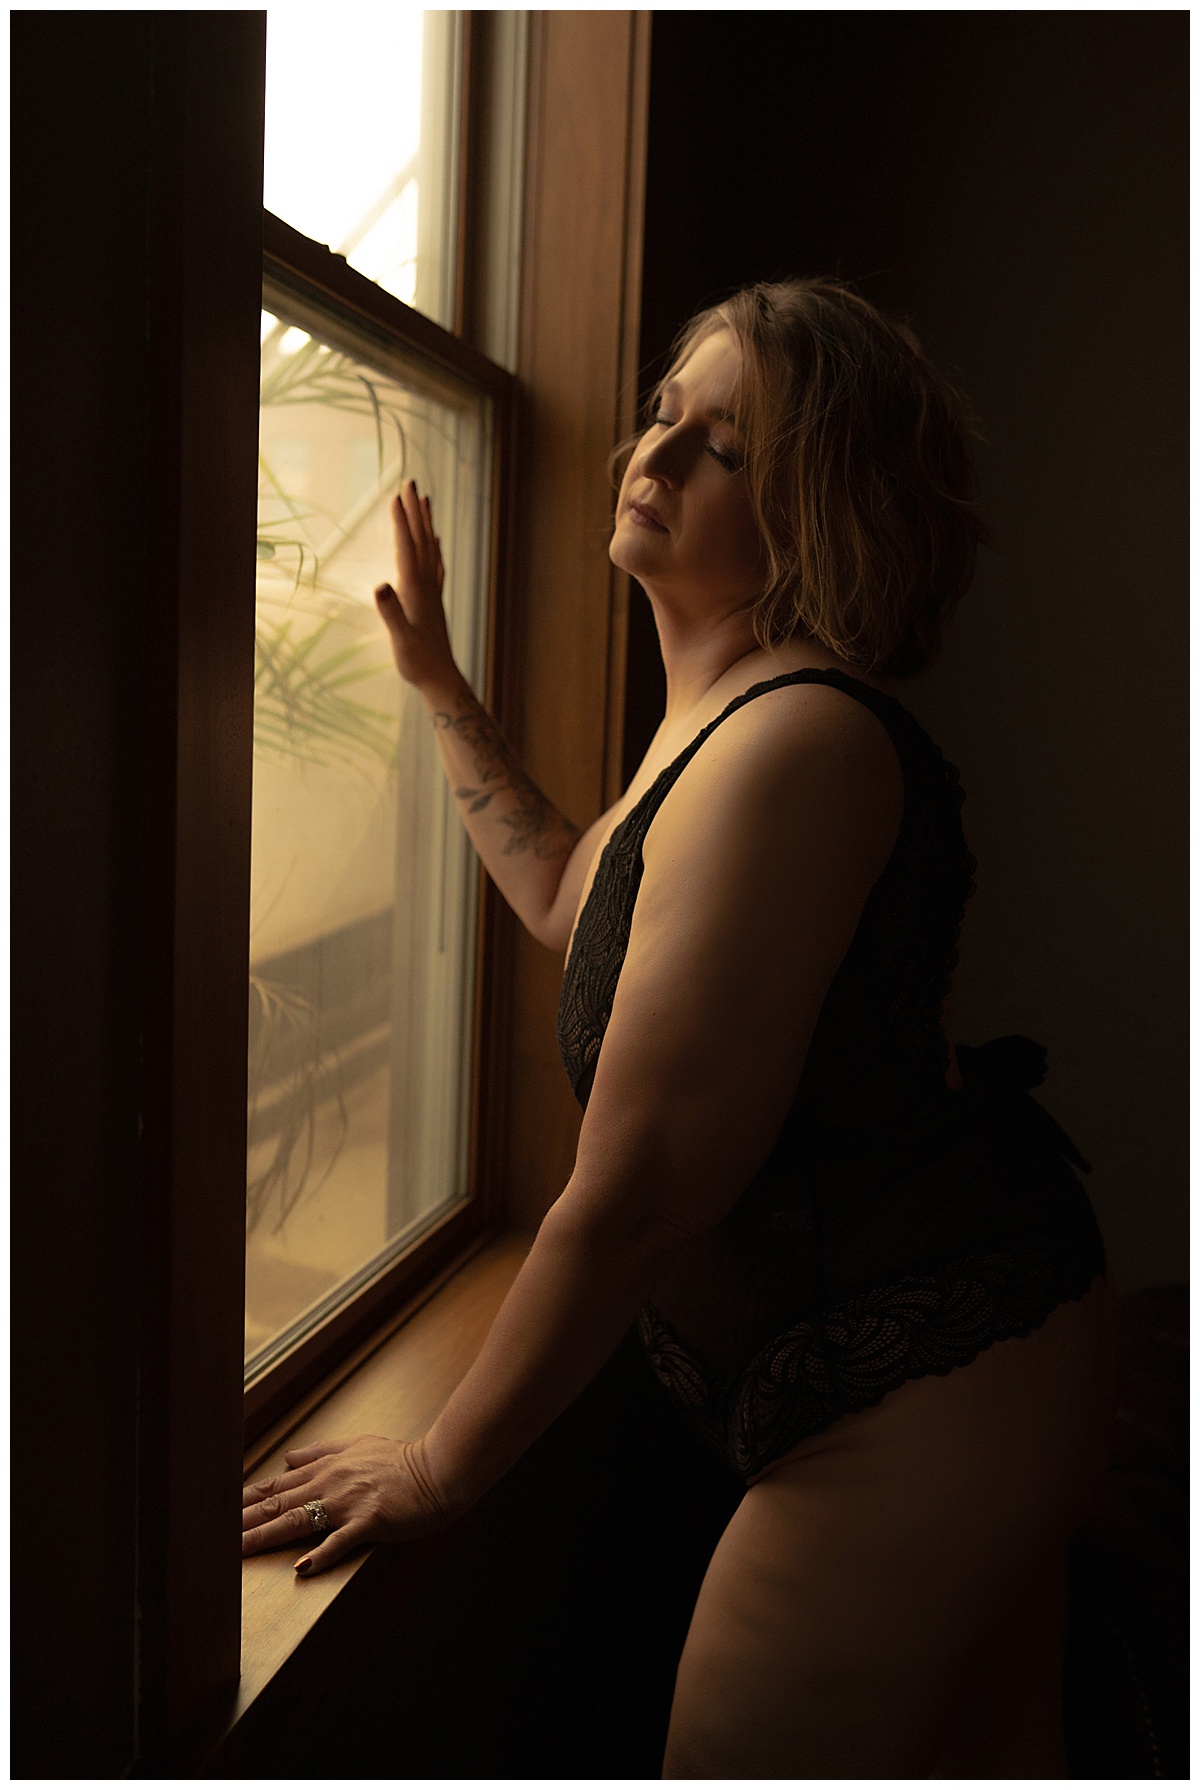 Girl sits in front of window wearing lingerie for Sioux Falls Boudoir Photographer